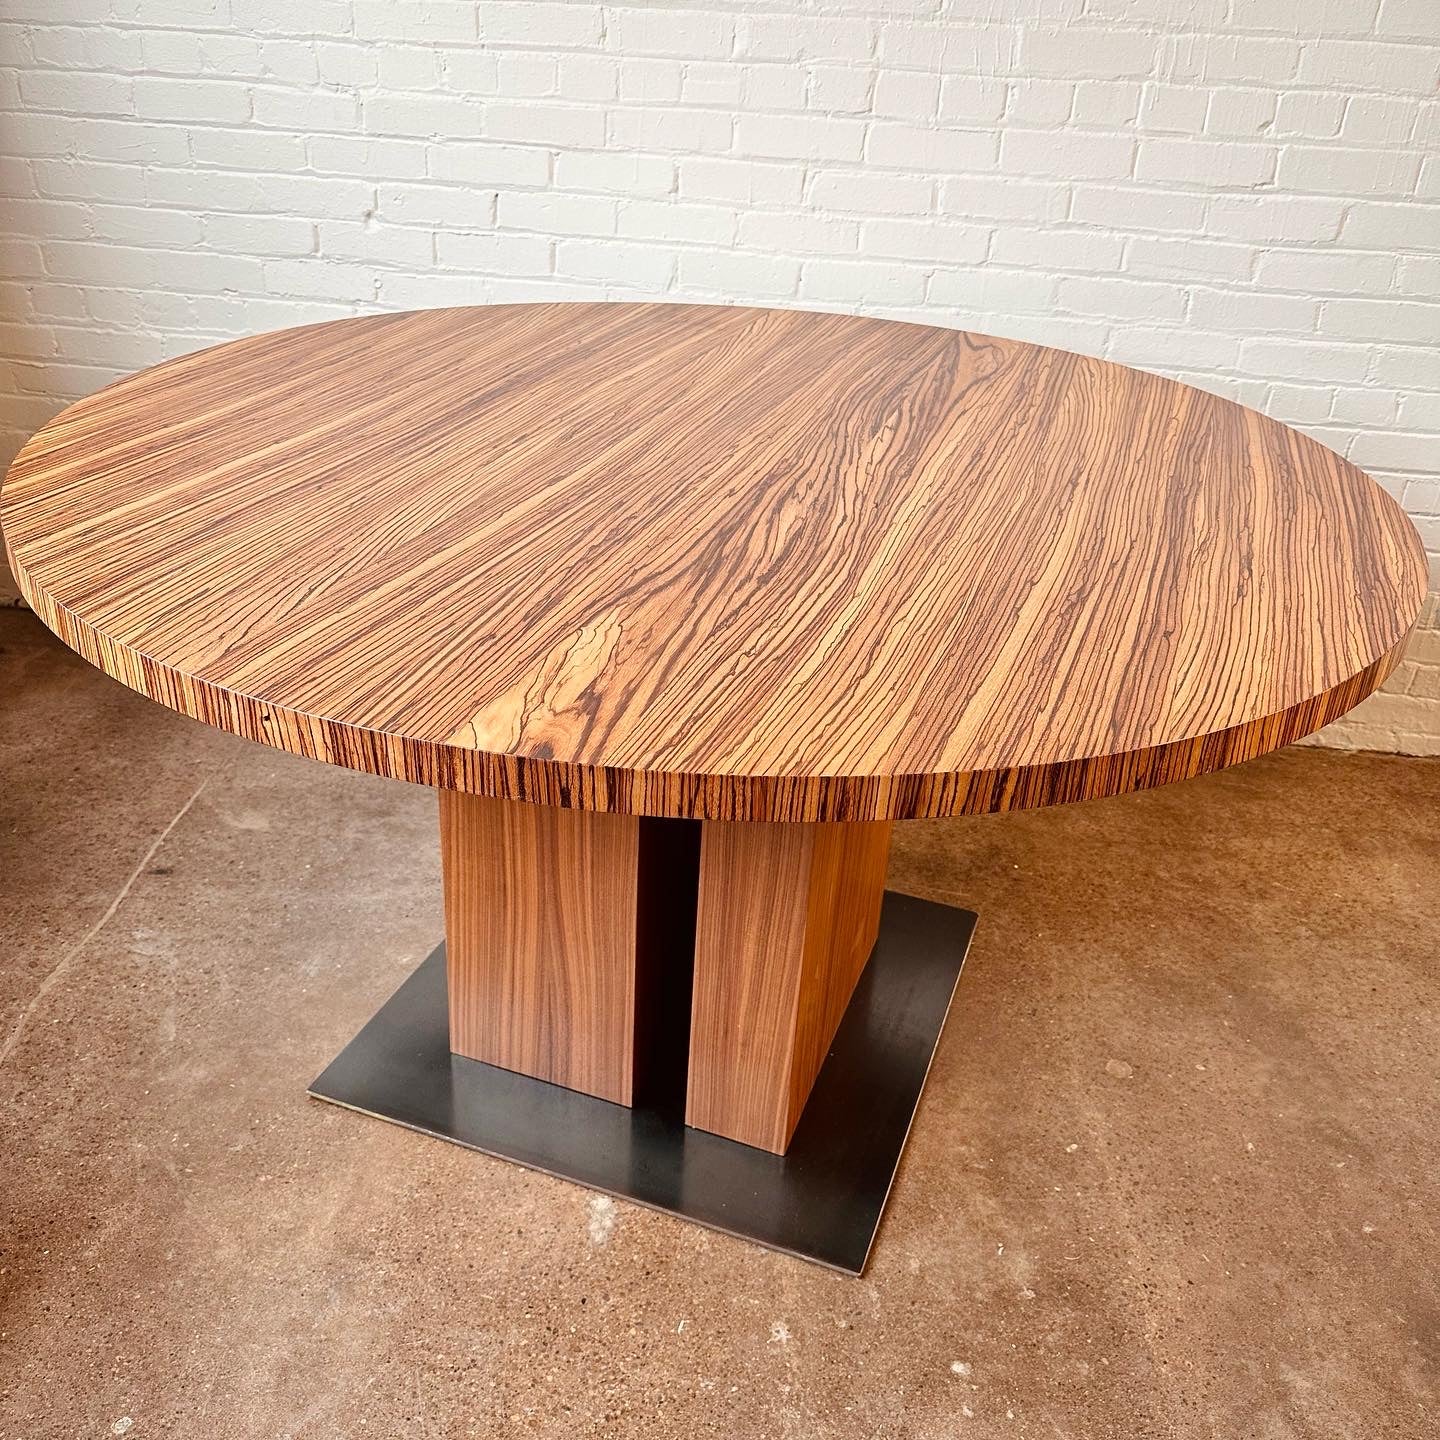 MODERN ROUND ZEBRA WOOD DINING TABLE WITH STEEL BASE